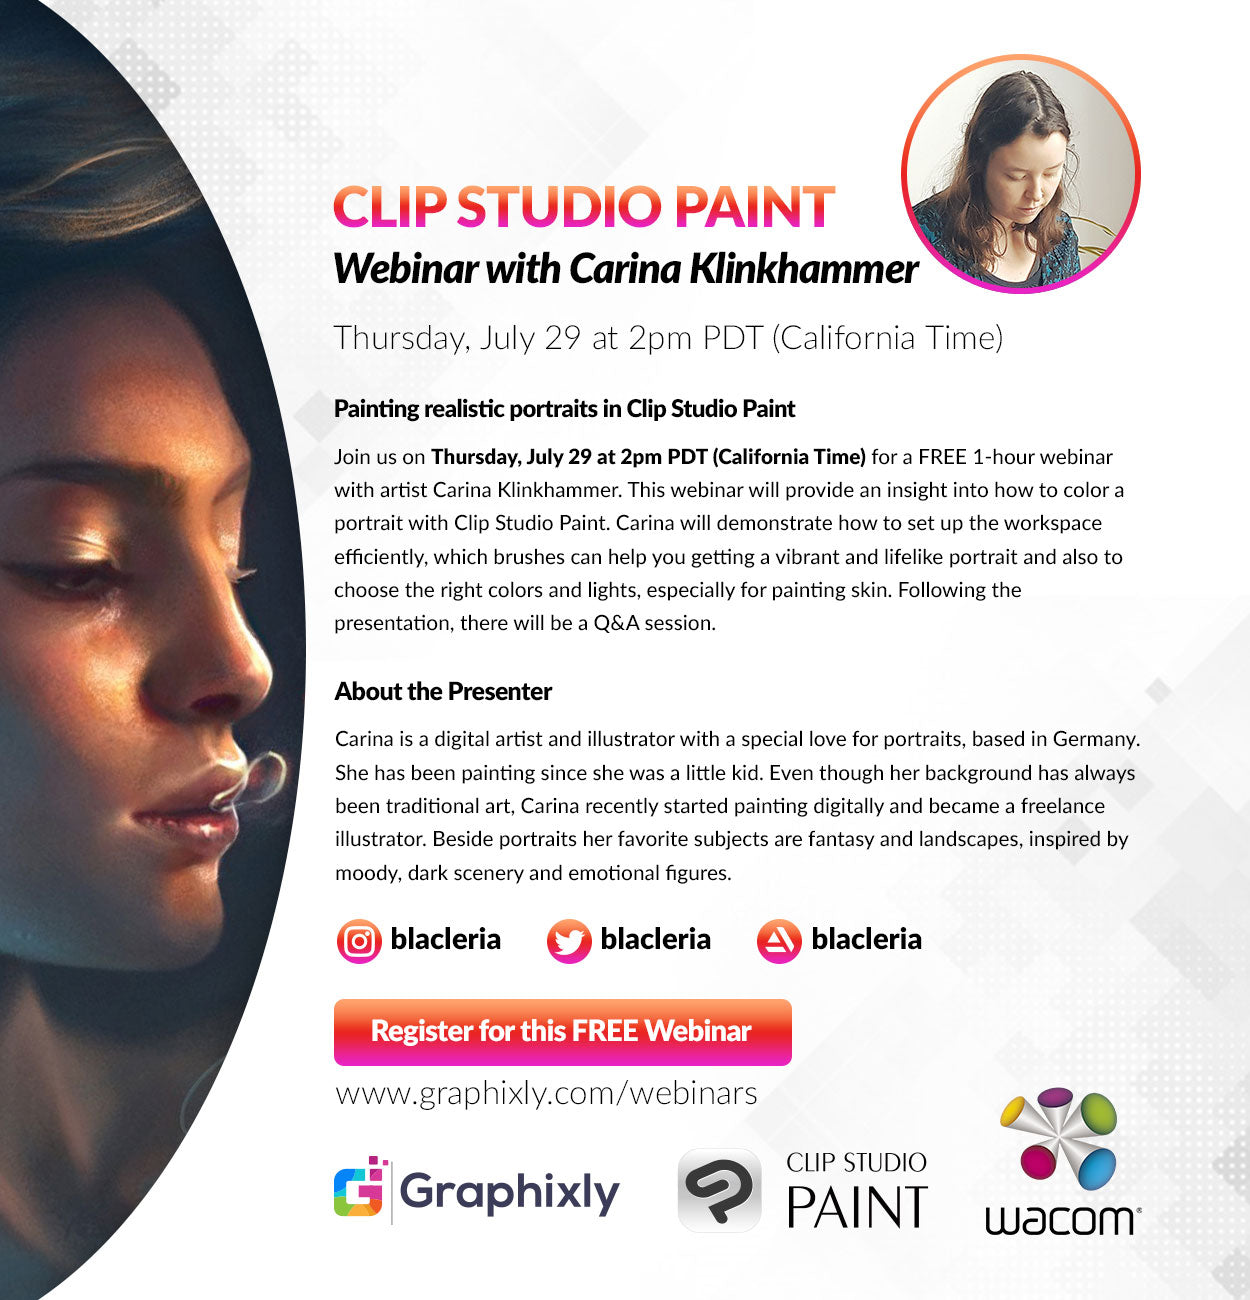 Webinar – Painting realistic portraits in Clip Studio Paint with Carina Klinkhammer